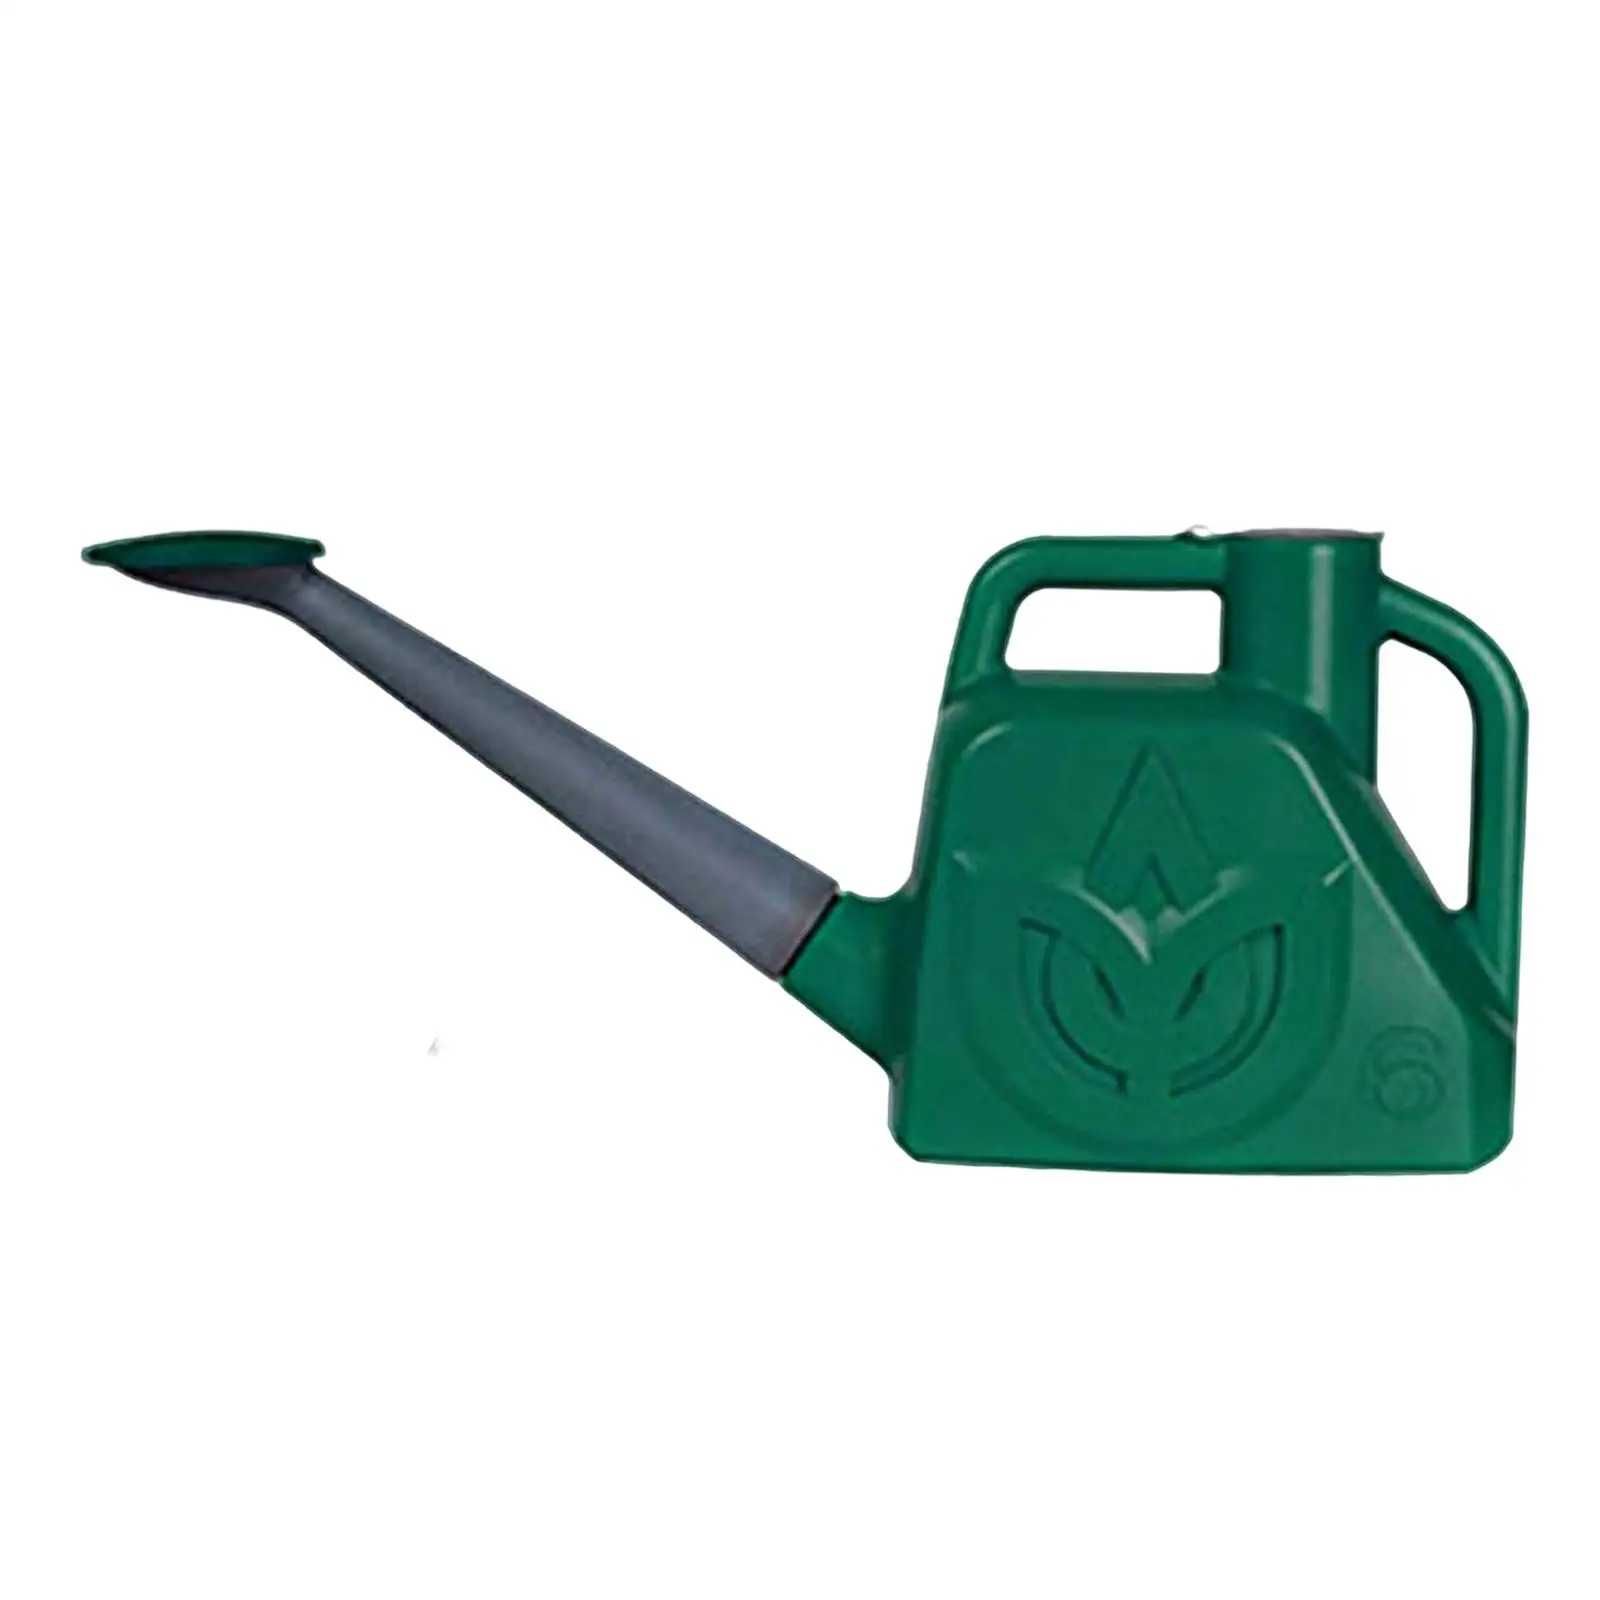 Large Capacity Watering Can with Sprinkler Head for Garden Flower